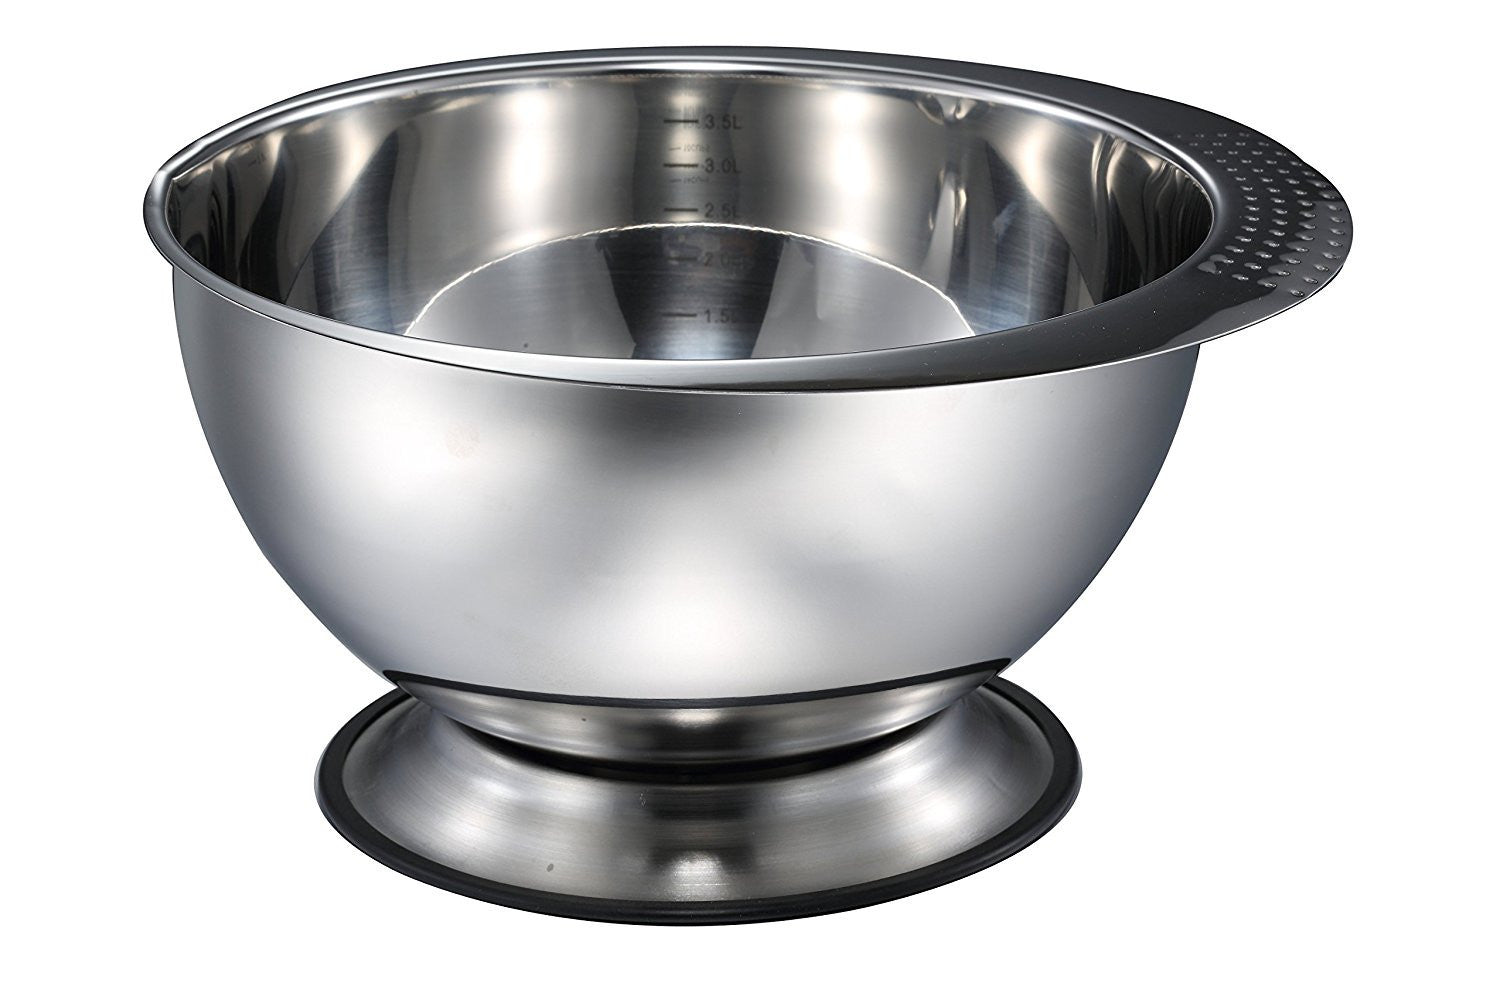 [9 Pack] 13 Quart Large Stainless Steel Mixing Bowl - Baking Bowl, Flat  Base Bowl, Preparation Bowls - Great for Baking, Kitchens, Chef's, Home use  by